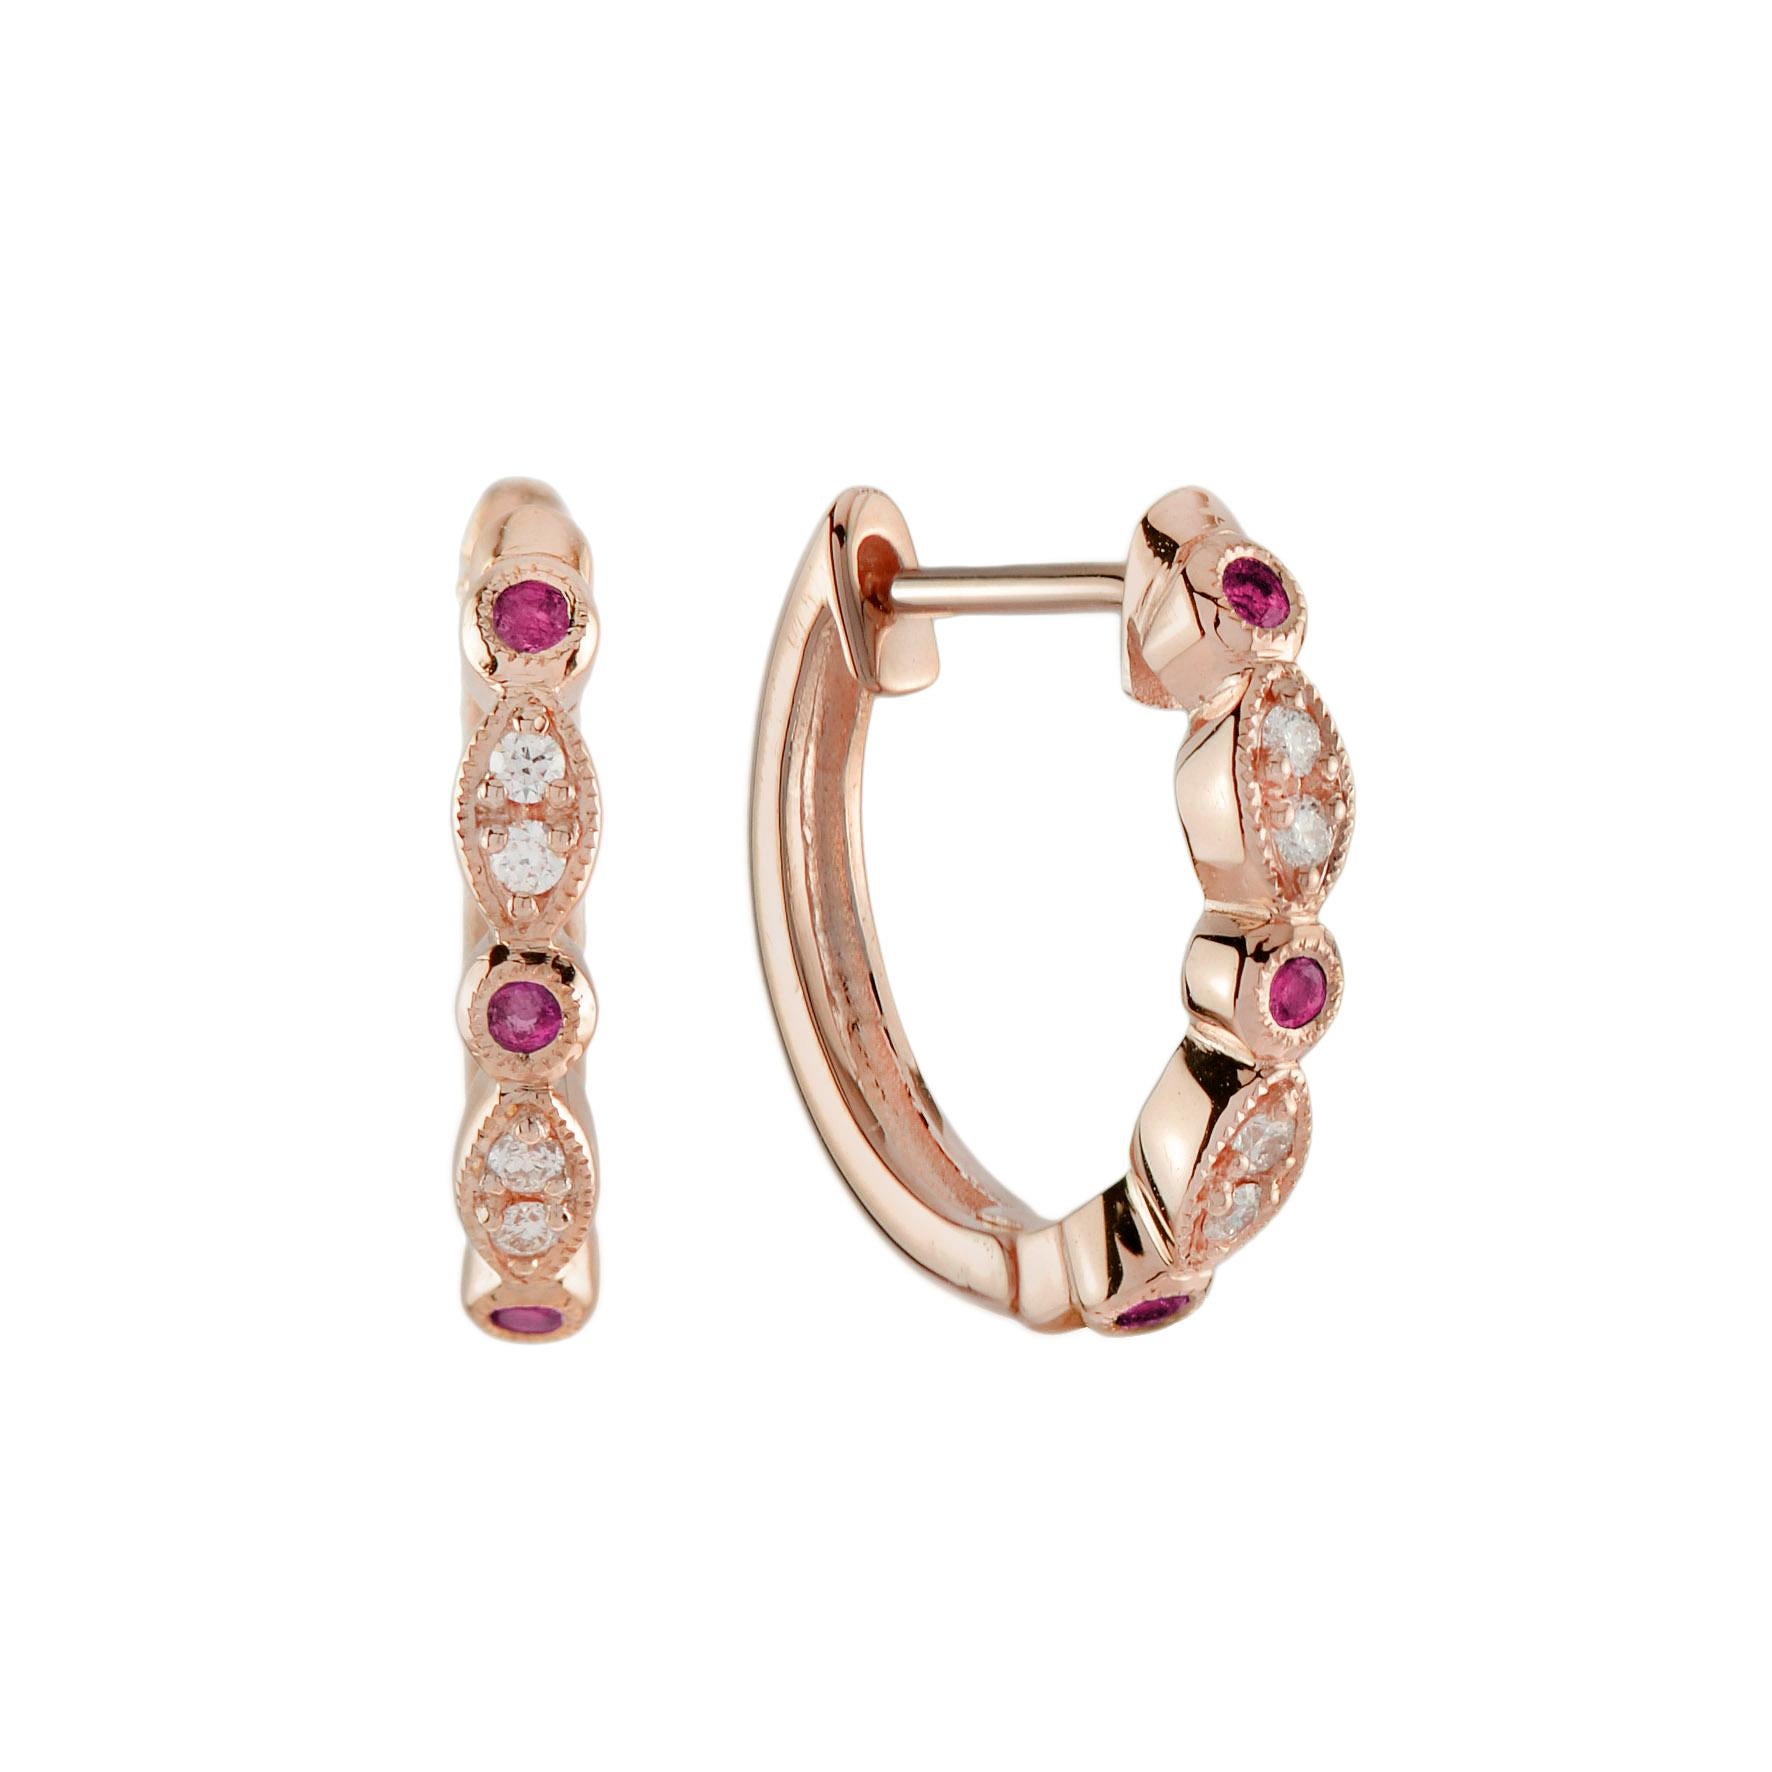 For Sale:  Ruby Diamond Vintage Style Band Ring and Huggies Earrings Lover Set in 14K Rose 9